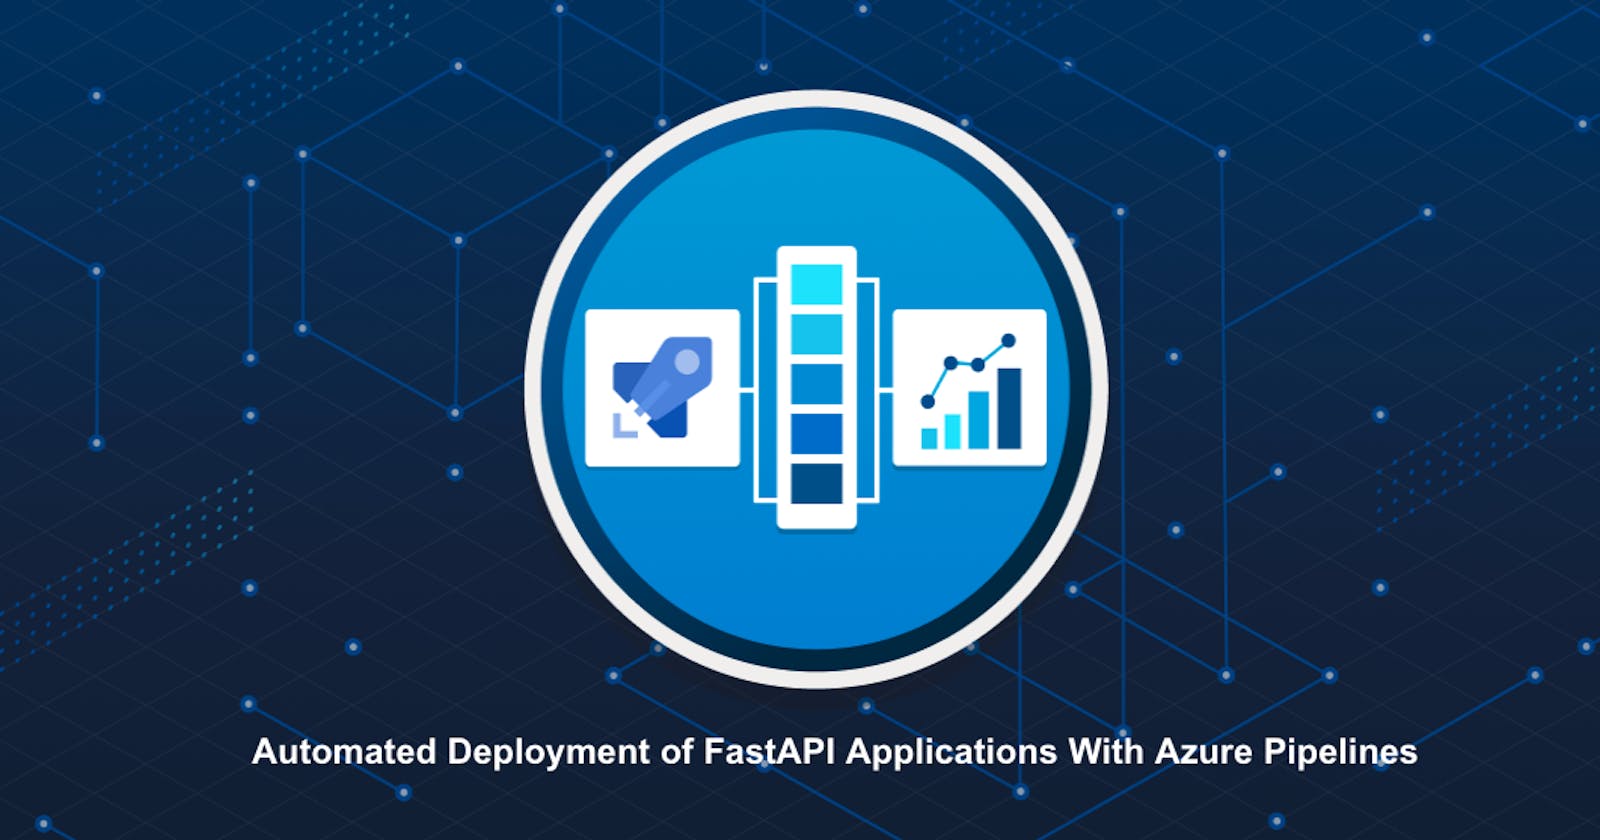 Automated Deployment of FastAPI Applications With Azure Pipelines